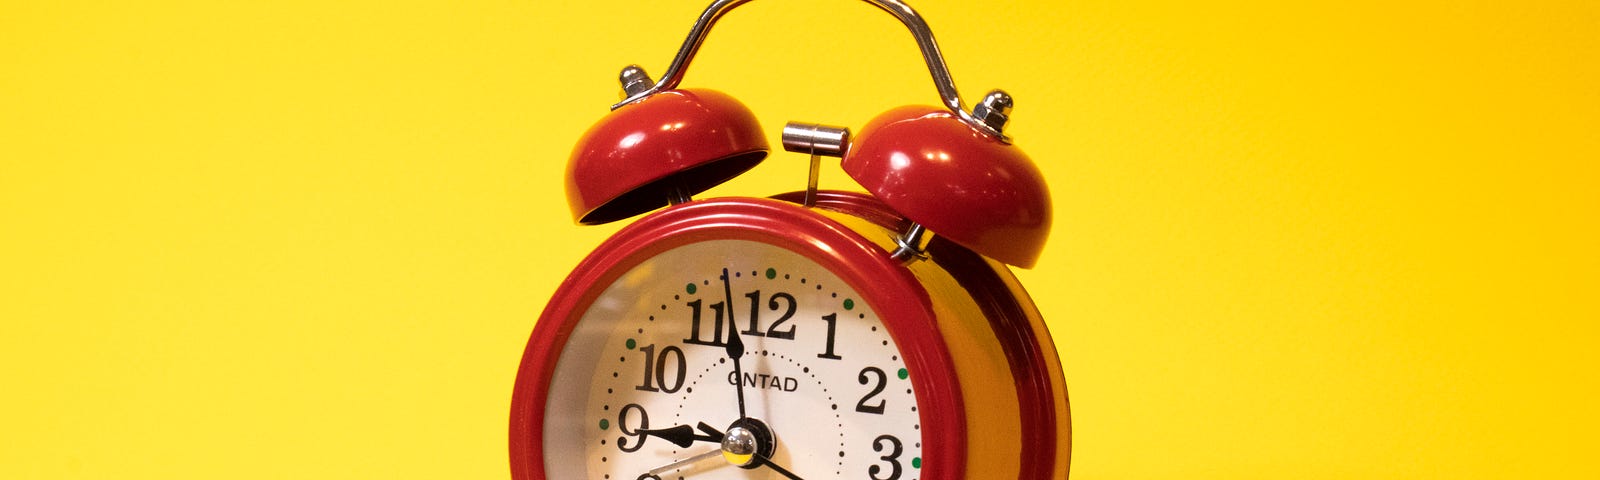 Bright red old-fashioned alarm clock set against a bright yellow background.